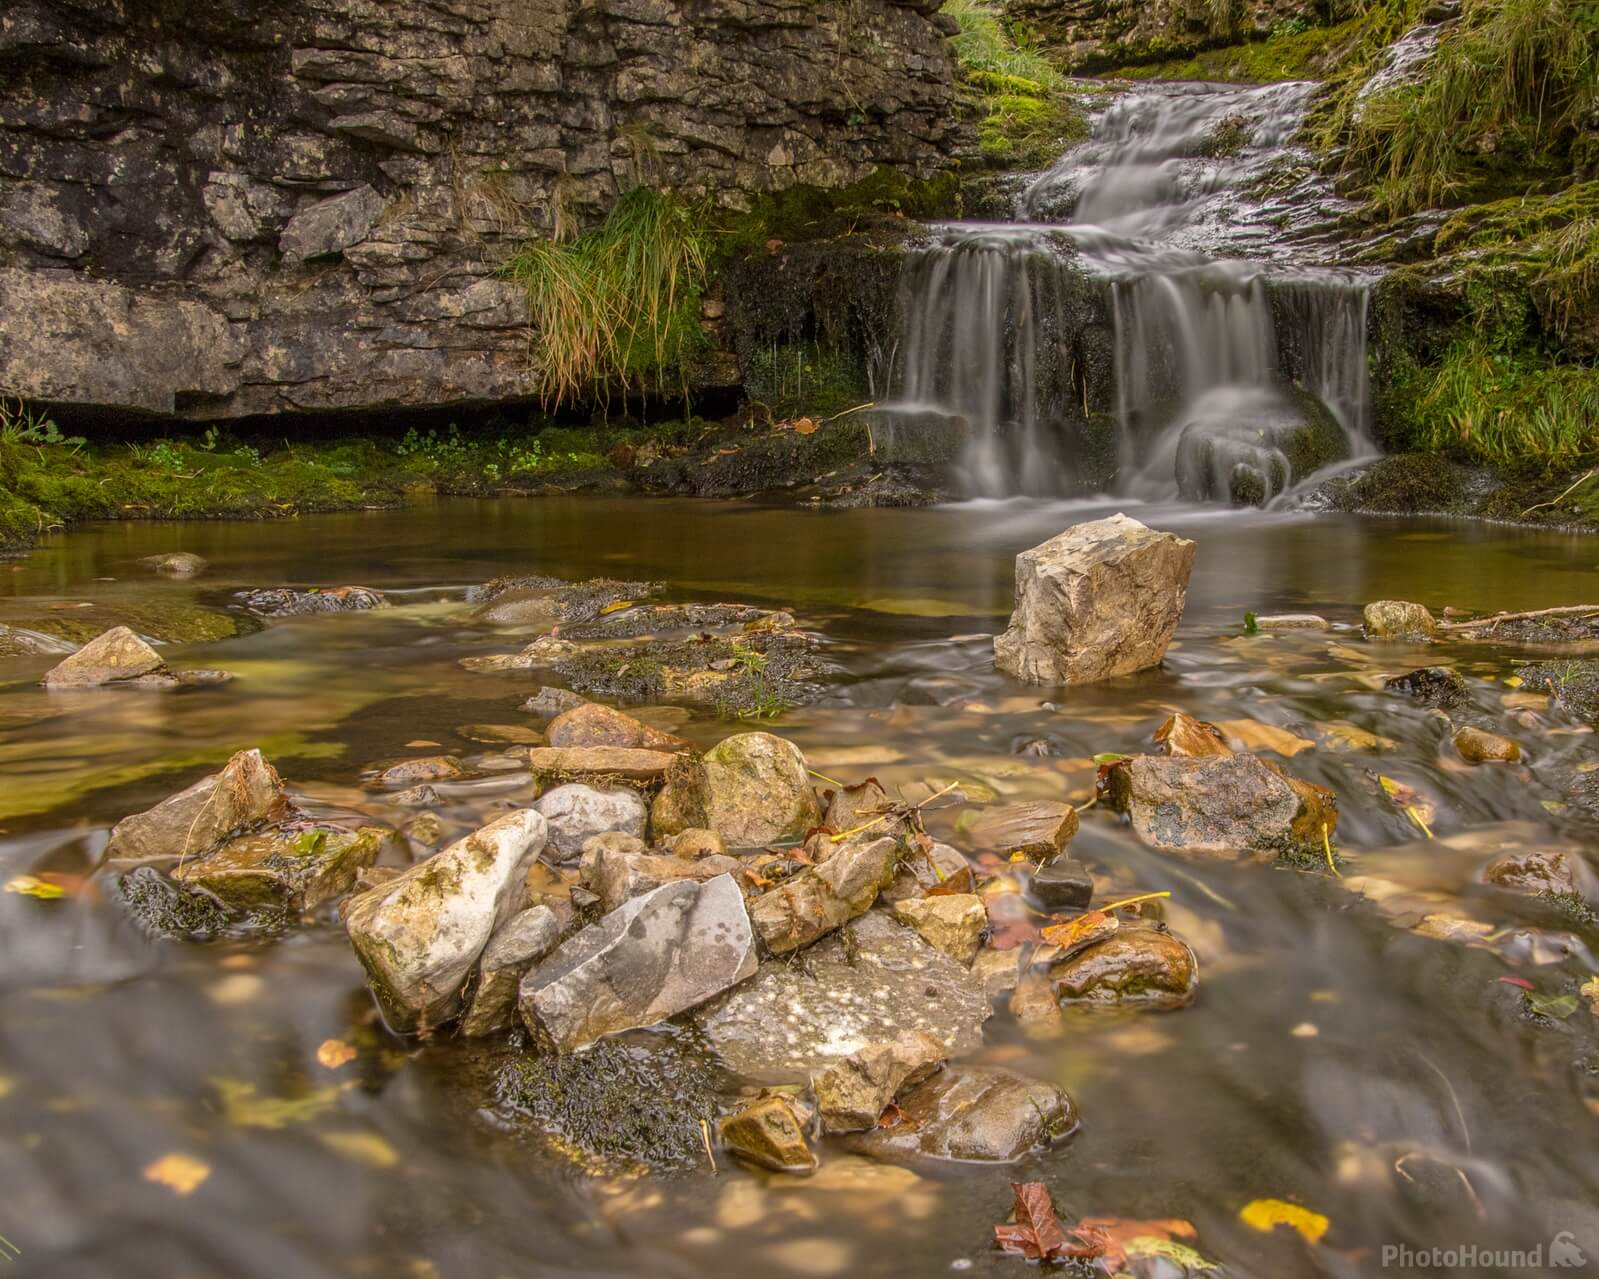 Image of Buckden Beck, Wharfedale by Andy Killingbeck